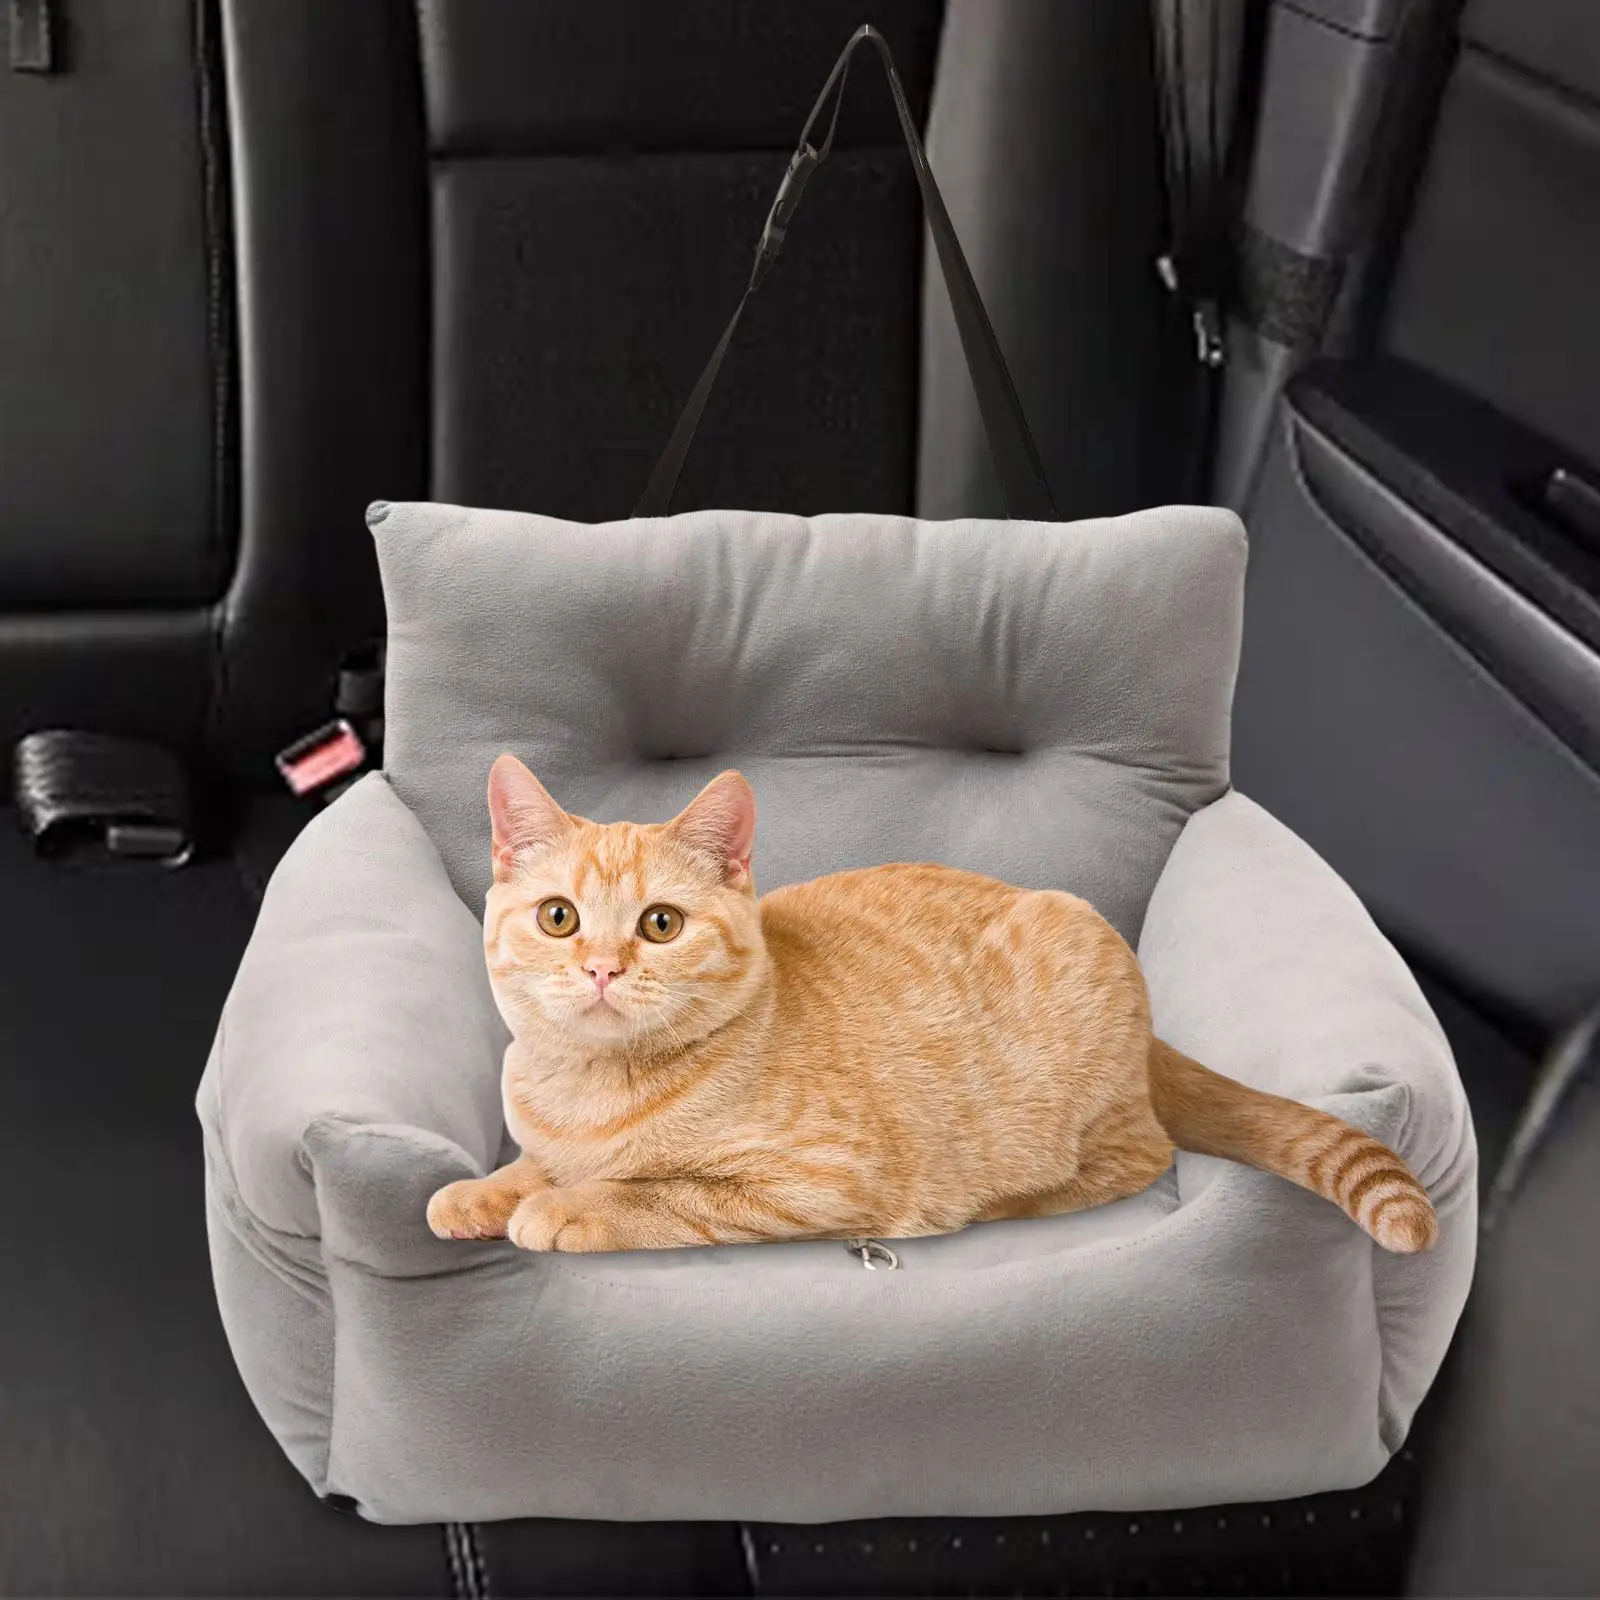 Portable Dog Car Seat Durable Soft Comfortable Kennel Travel Bed Protector Dog Booster Seat for Pet Accessories Cats Puppy